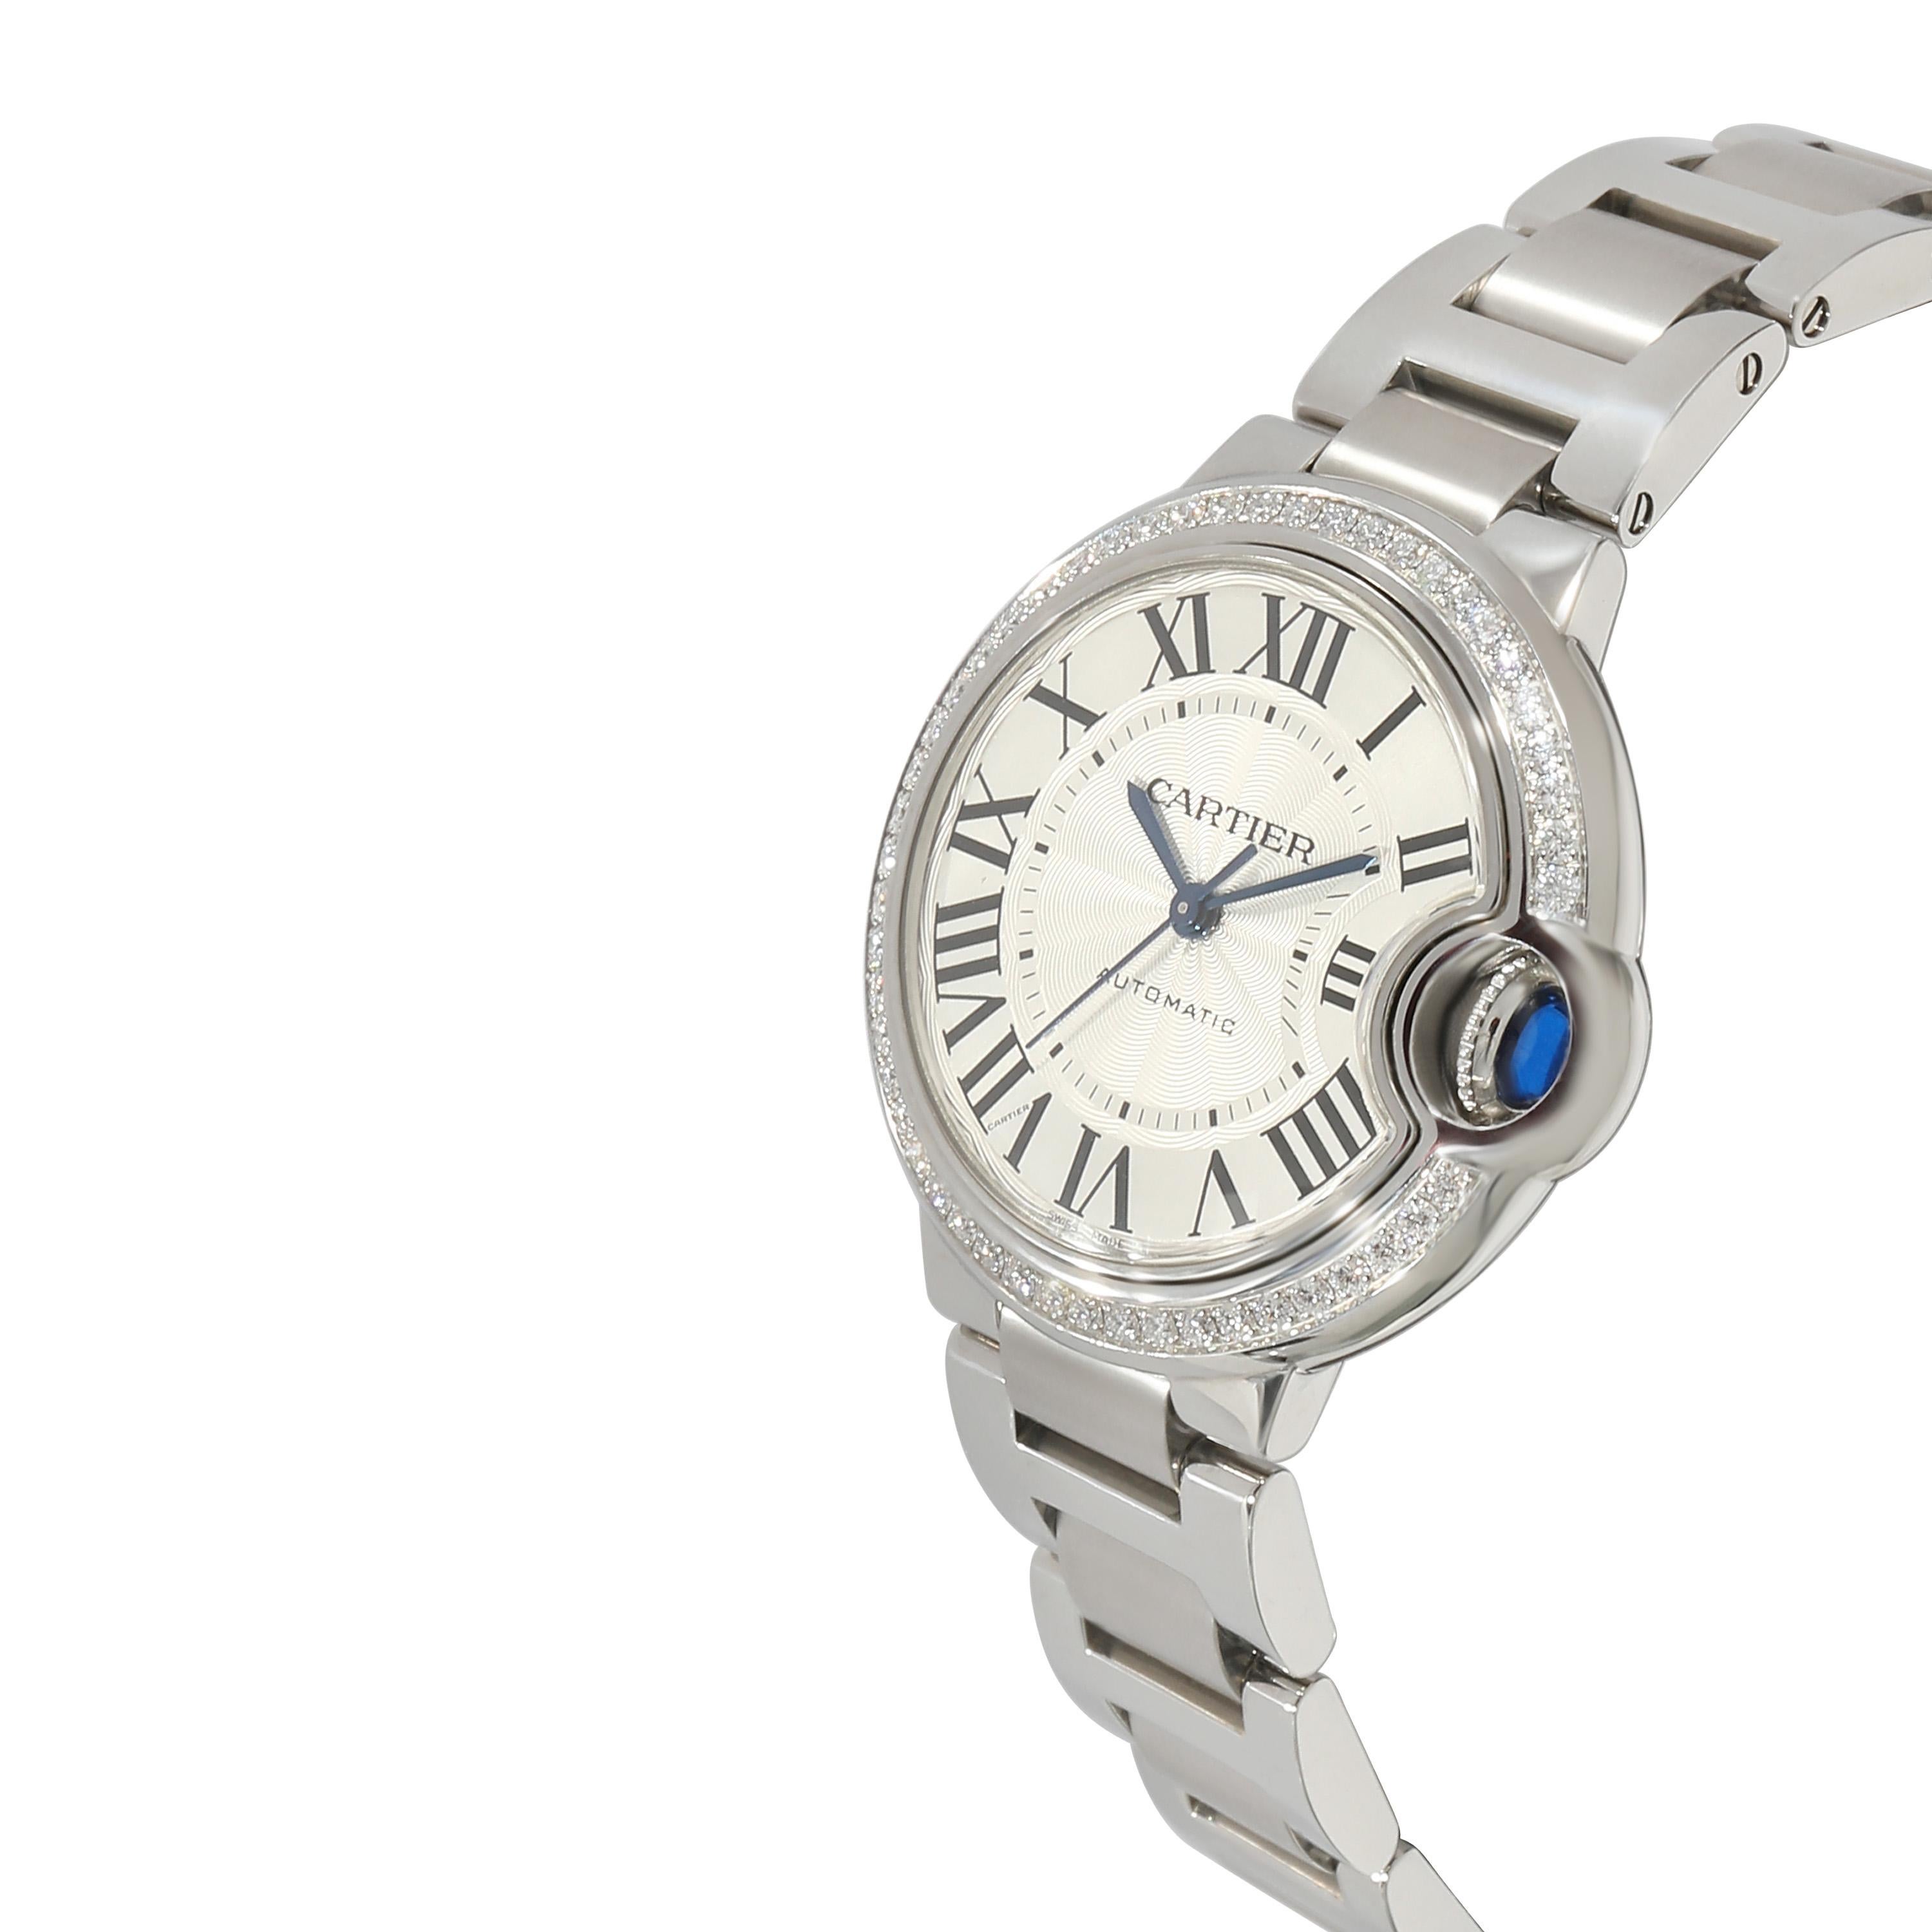 Cartier Ballon Bleu de Cartier W4BB0023 Women's Watch in  Stainless Steel In Excellent Condition For Sale In New York, NY